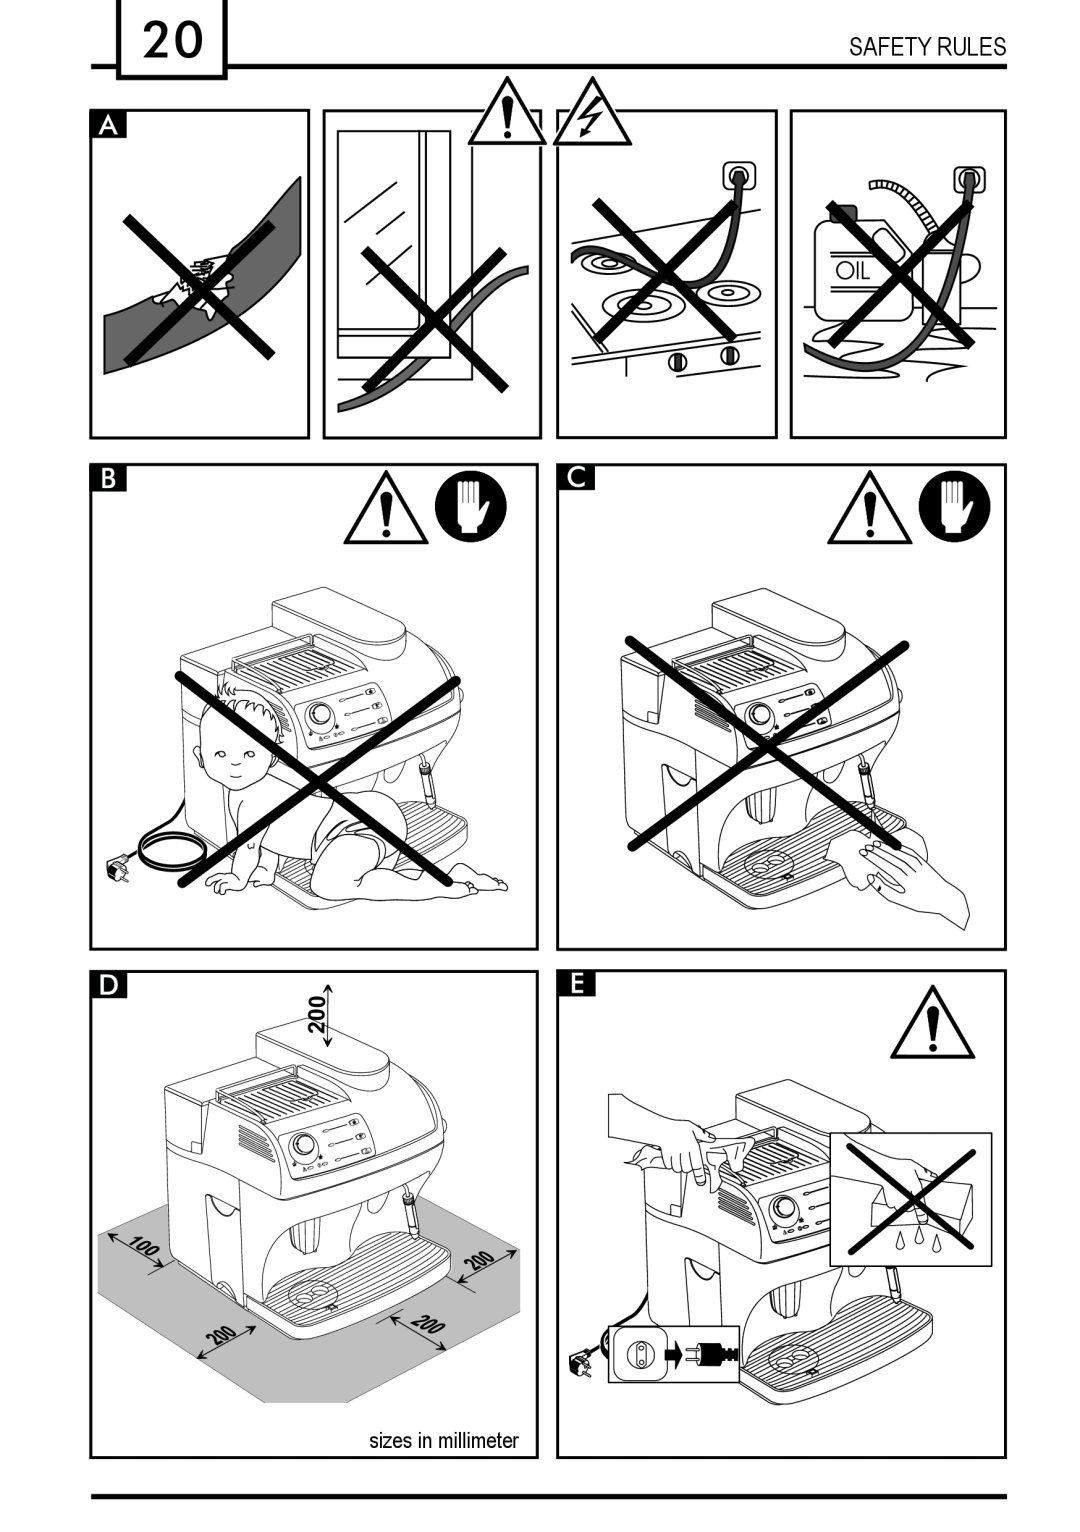 Gaggia Syncrony manual Safety Rules, sizes in millimeter 